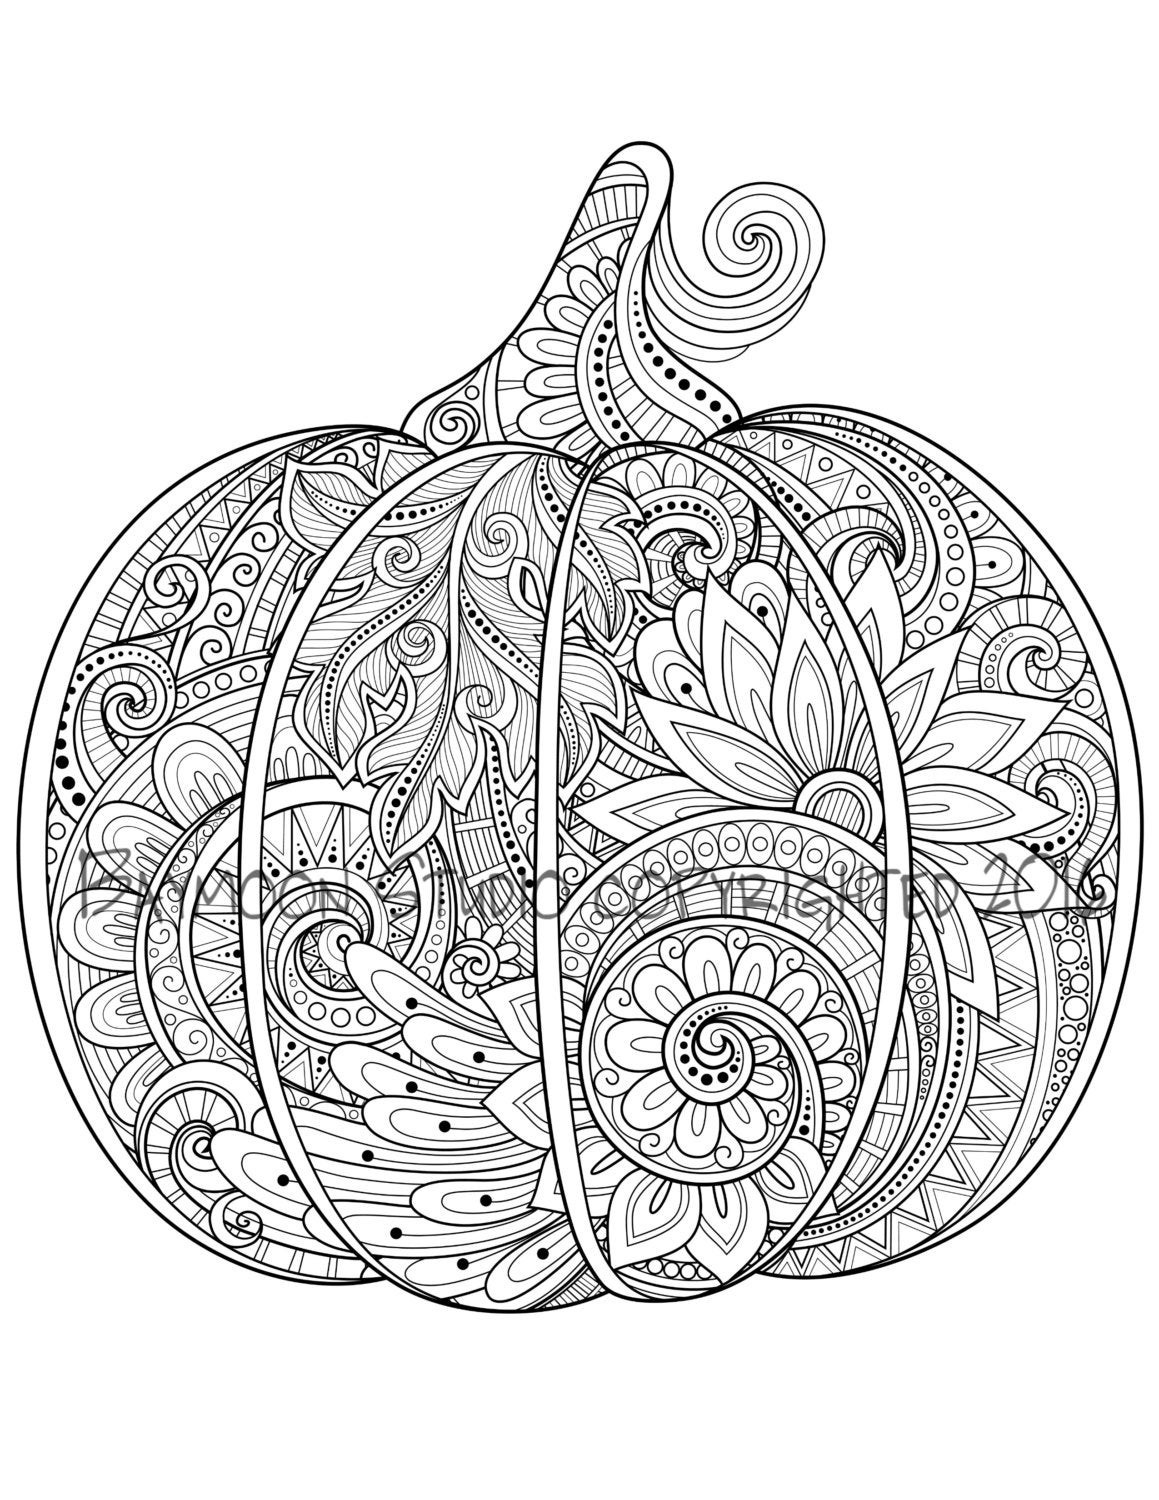 Paisley Printable Coloring Pages
 Paisley Pumpkin Coloring Page Printable Coloring by